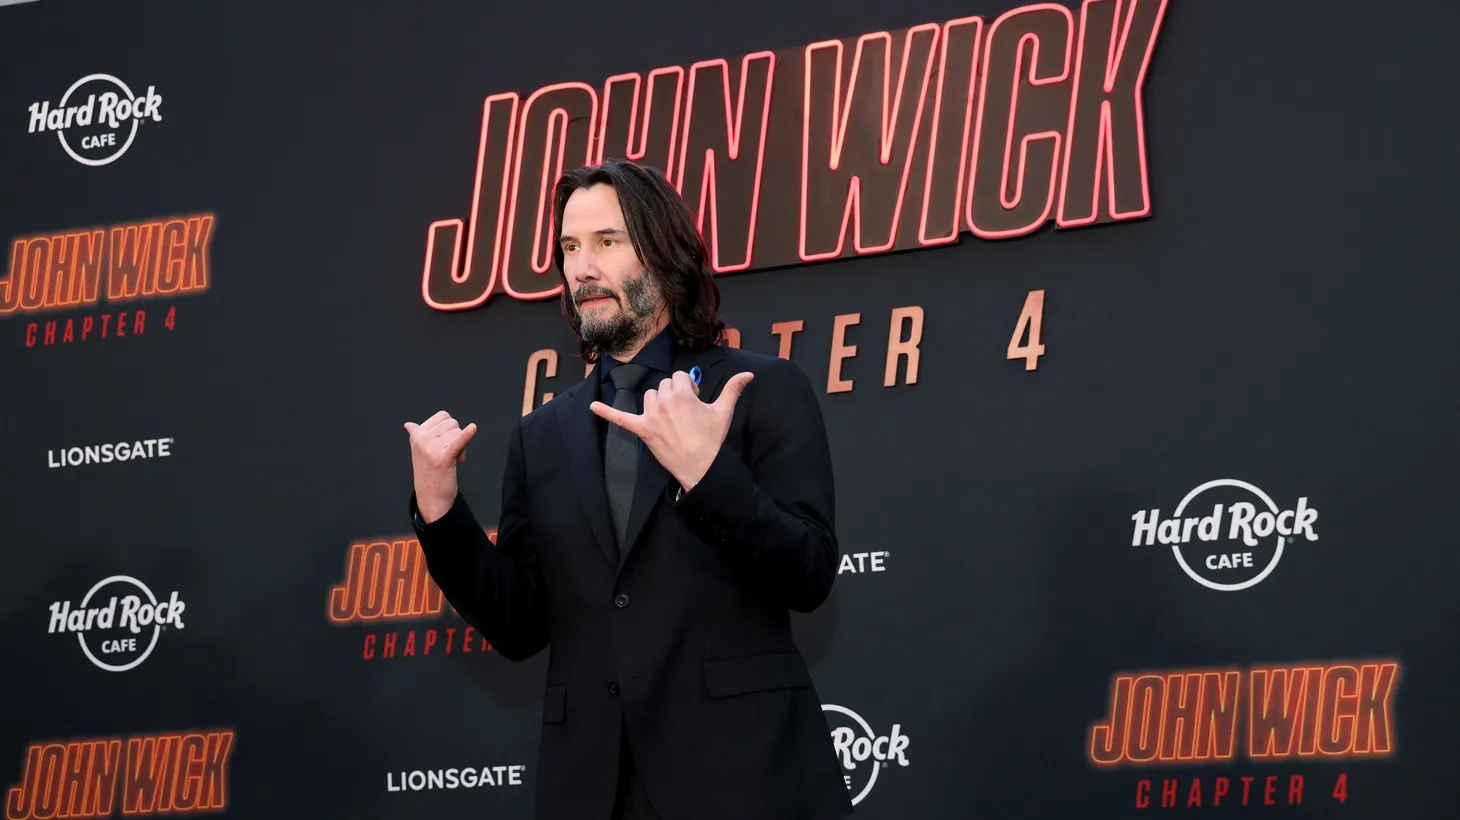 Keanu Reeves attends the premiere for the film "John Wick: Chapter 4" in Los Angeles on March 20, 2023.